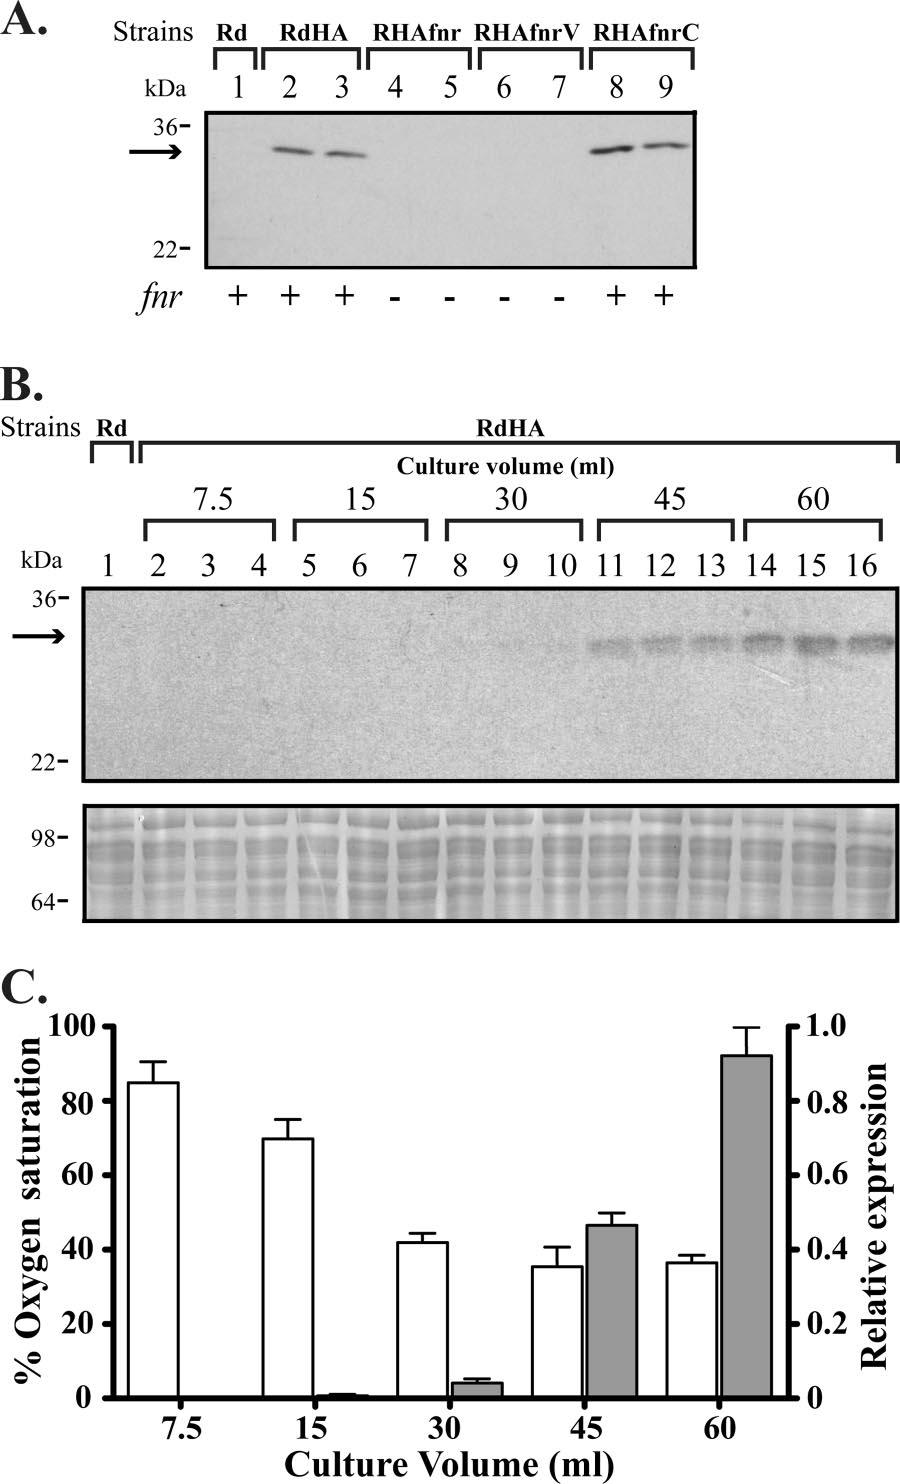 VOL. 77, 2009 FNR AND ytfe IN H. INFLUENZAE RNS RESISTANCE 1951 FIG. 2. Modulation of nrfa reporter fusion expression by FNR and oxygen availability.